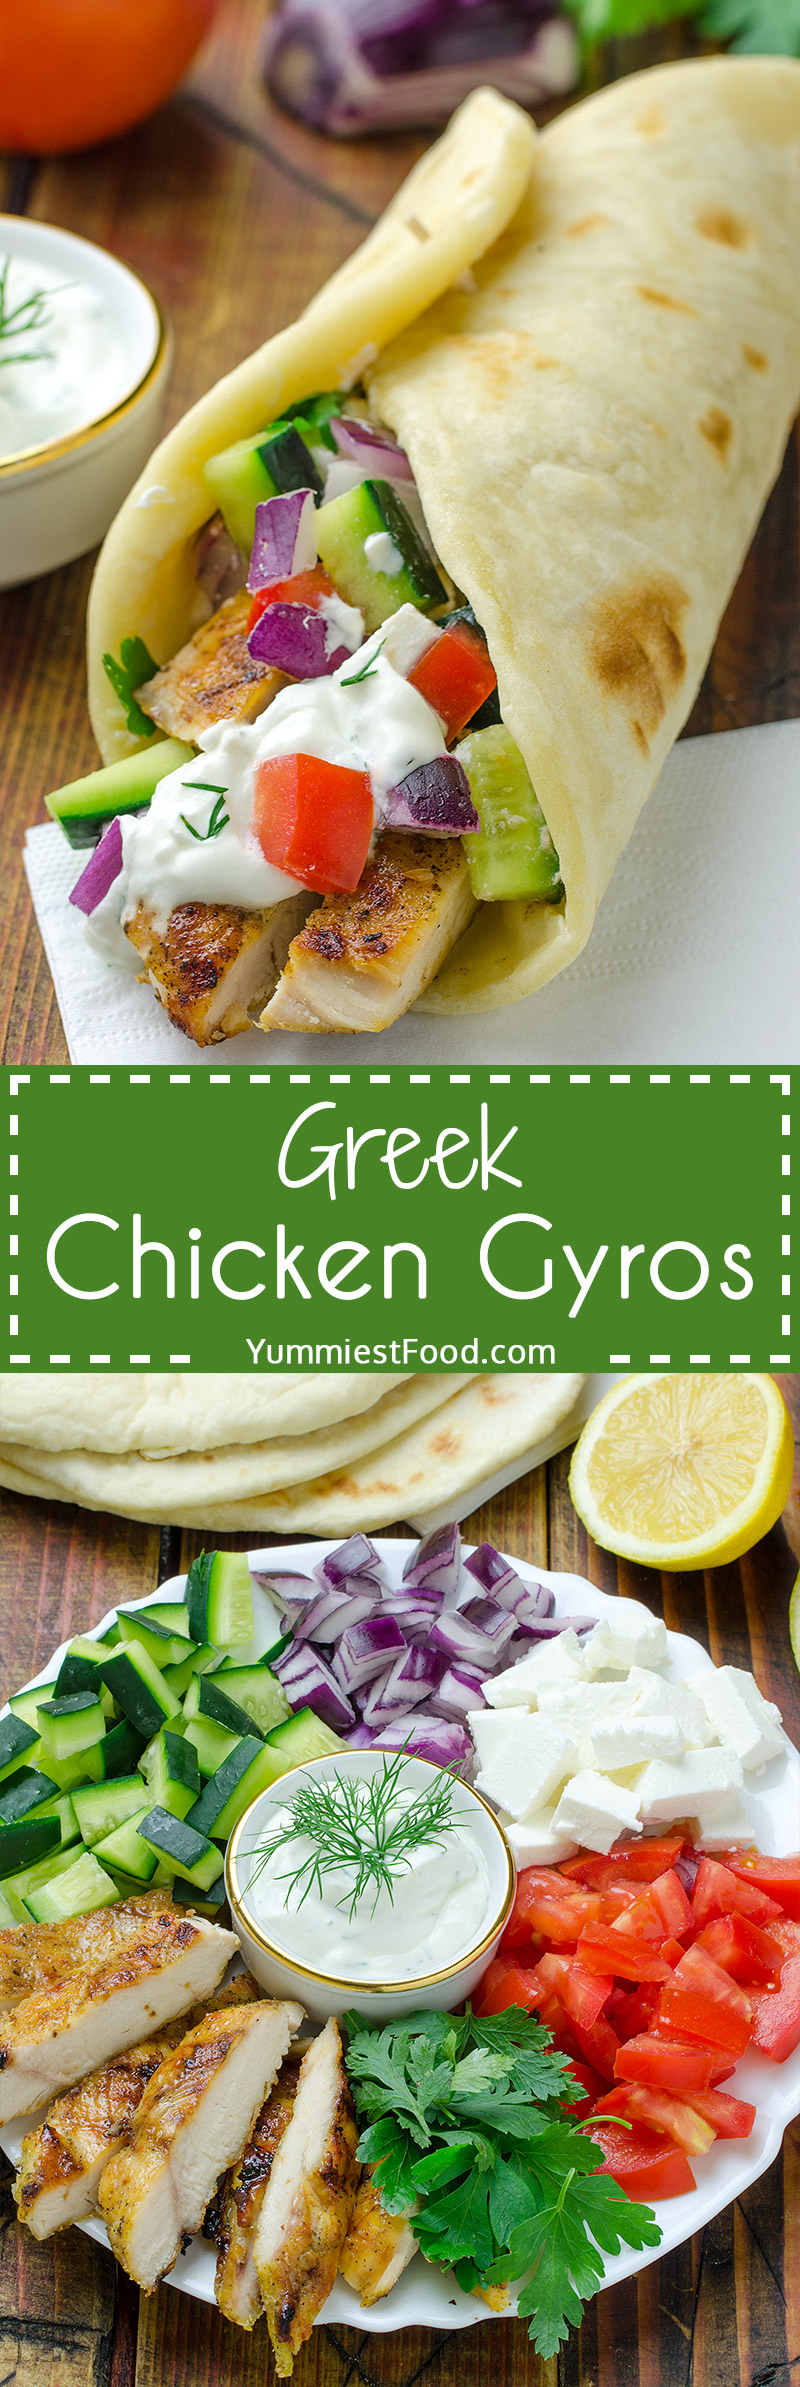 You can easily make Greek Chicken Gyros with Tzaziki Sauce and Pita Flatbread at home and enjoy in this healthy and very tasty recipe.